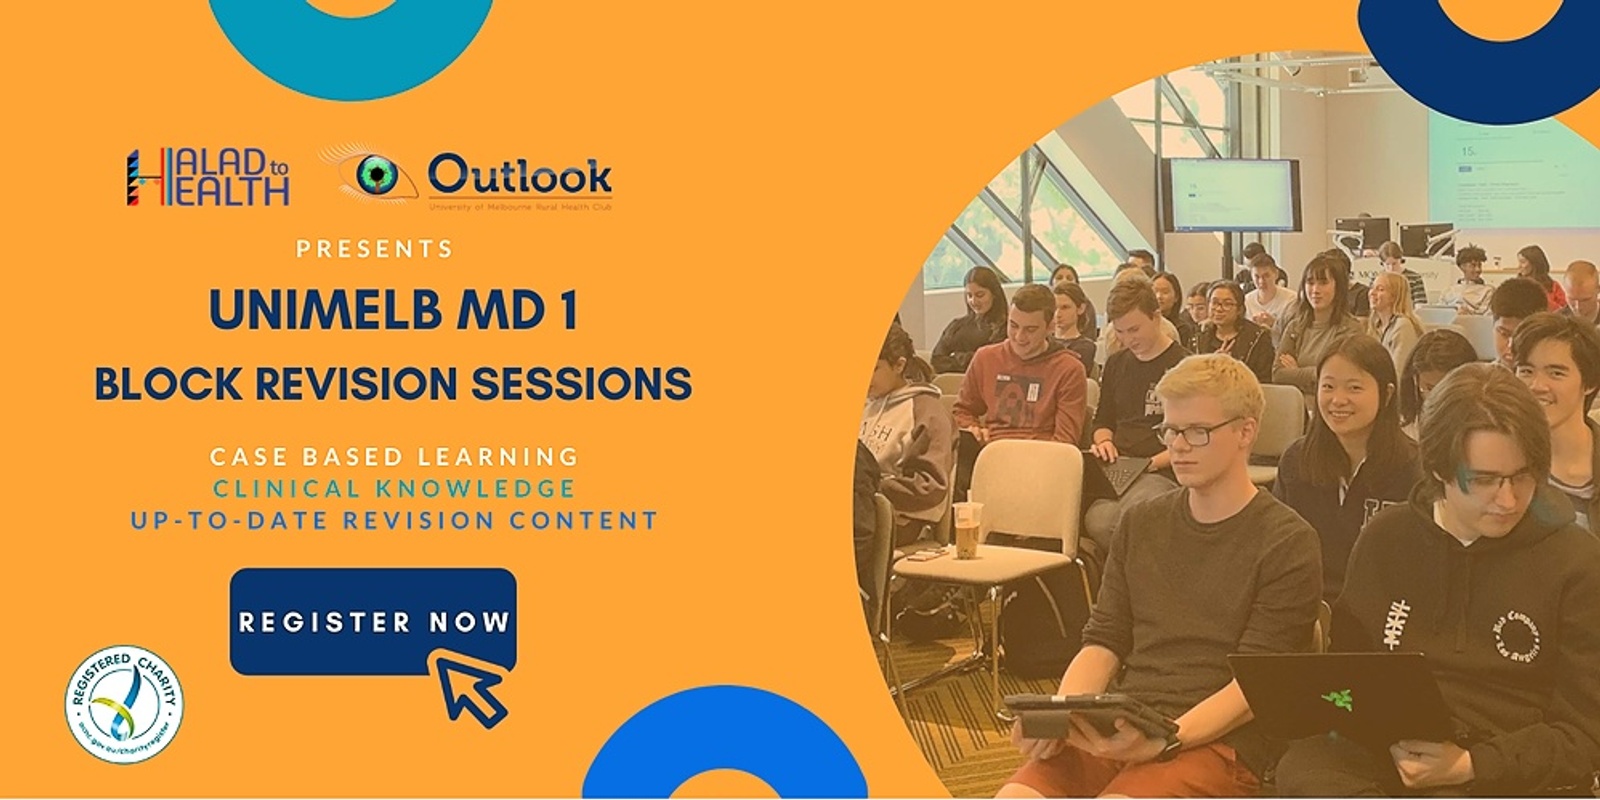 ðŸŽ“UniMelb MD 1 Block Revision Sessions | Halad to Health X Outlook Rural Health Club